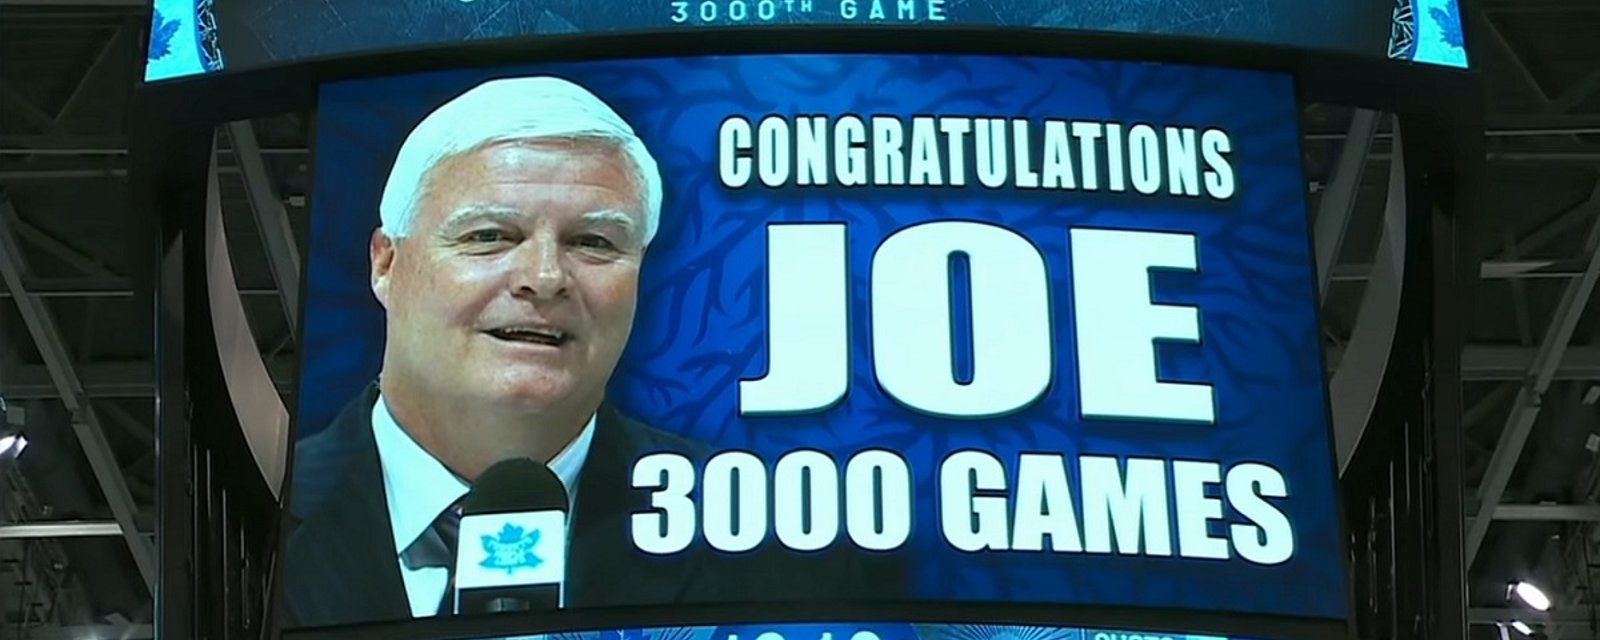 Long-time voice of the Leafs Joe Bowen honored for his 3000th game tonight.